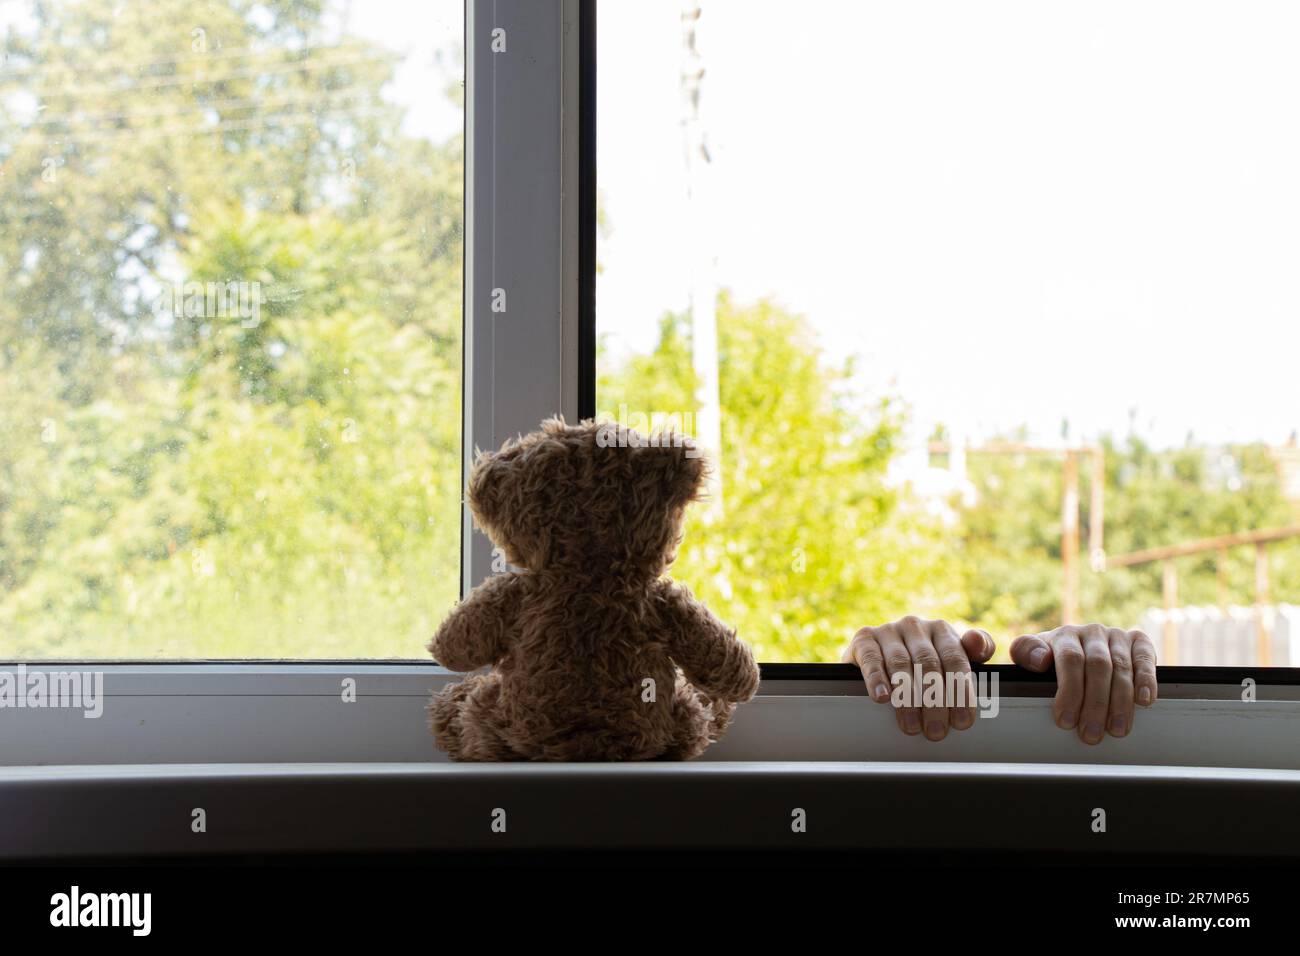 Children's hands hold on to the window from the side of the street, and a teddy bear sits on the window, suicide, hands outside the window, suicide Stock Photo